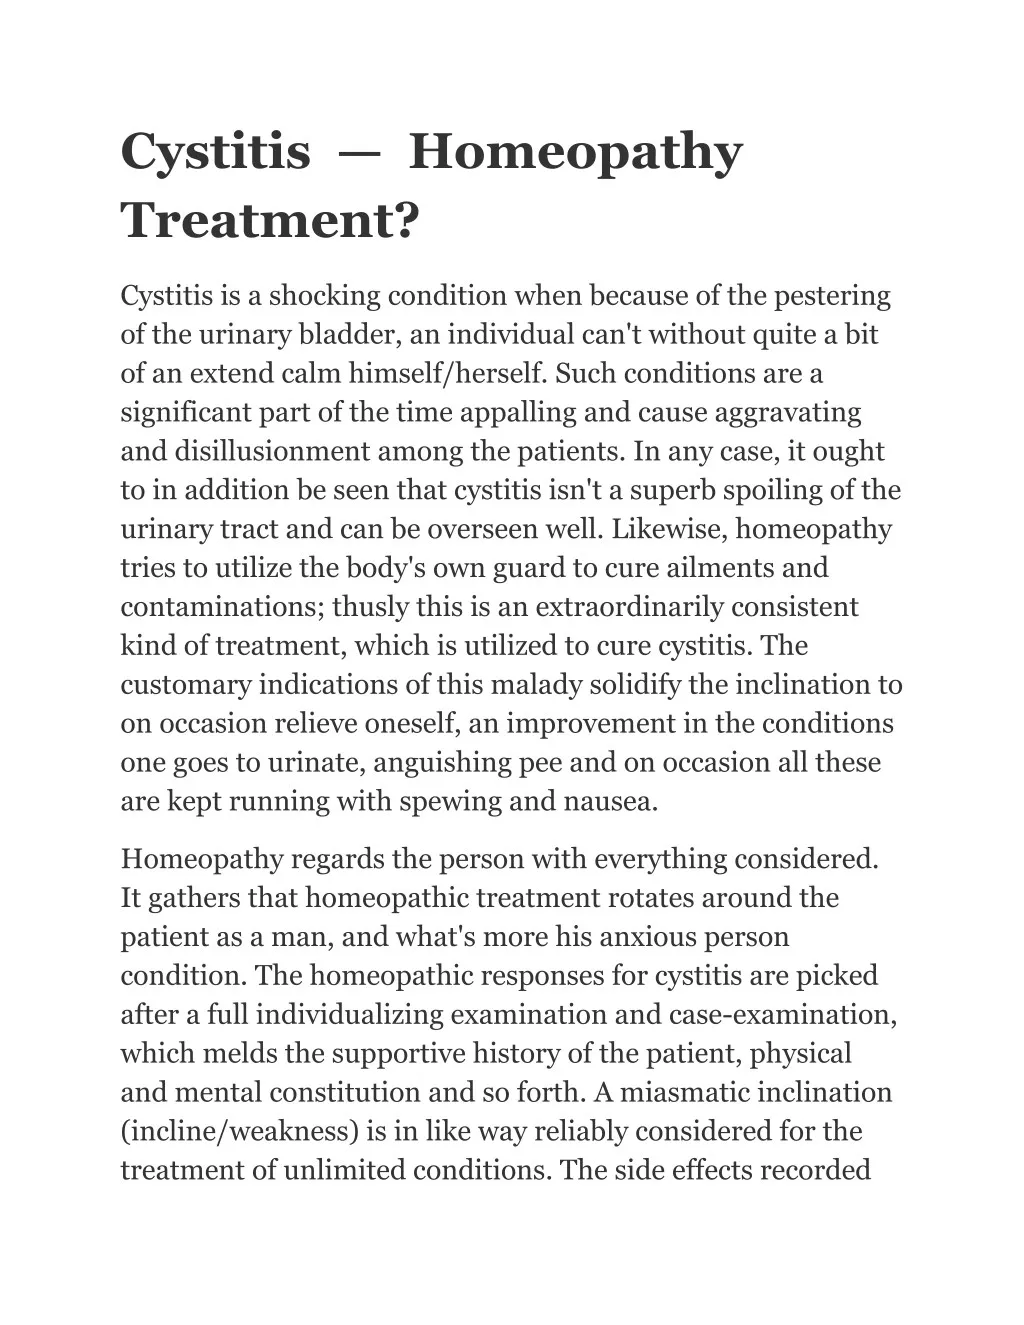 cystitis homeopathy treatment